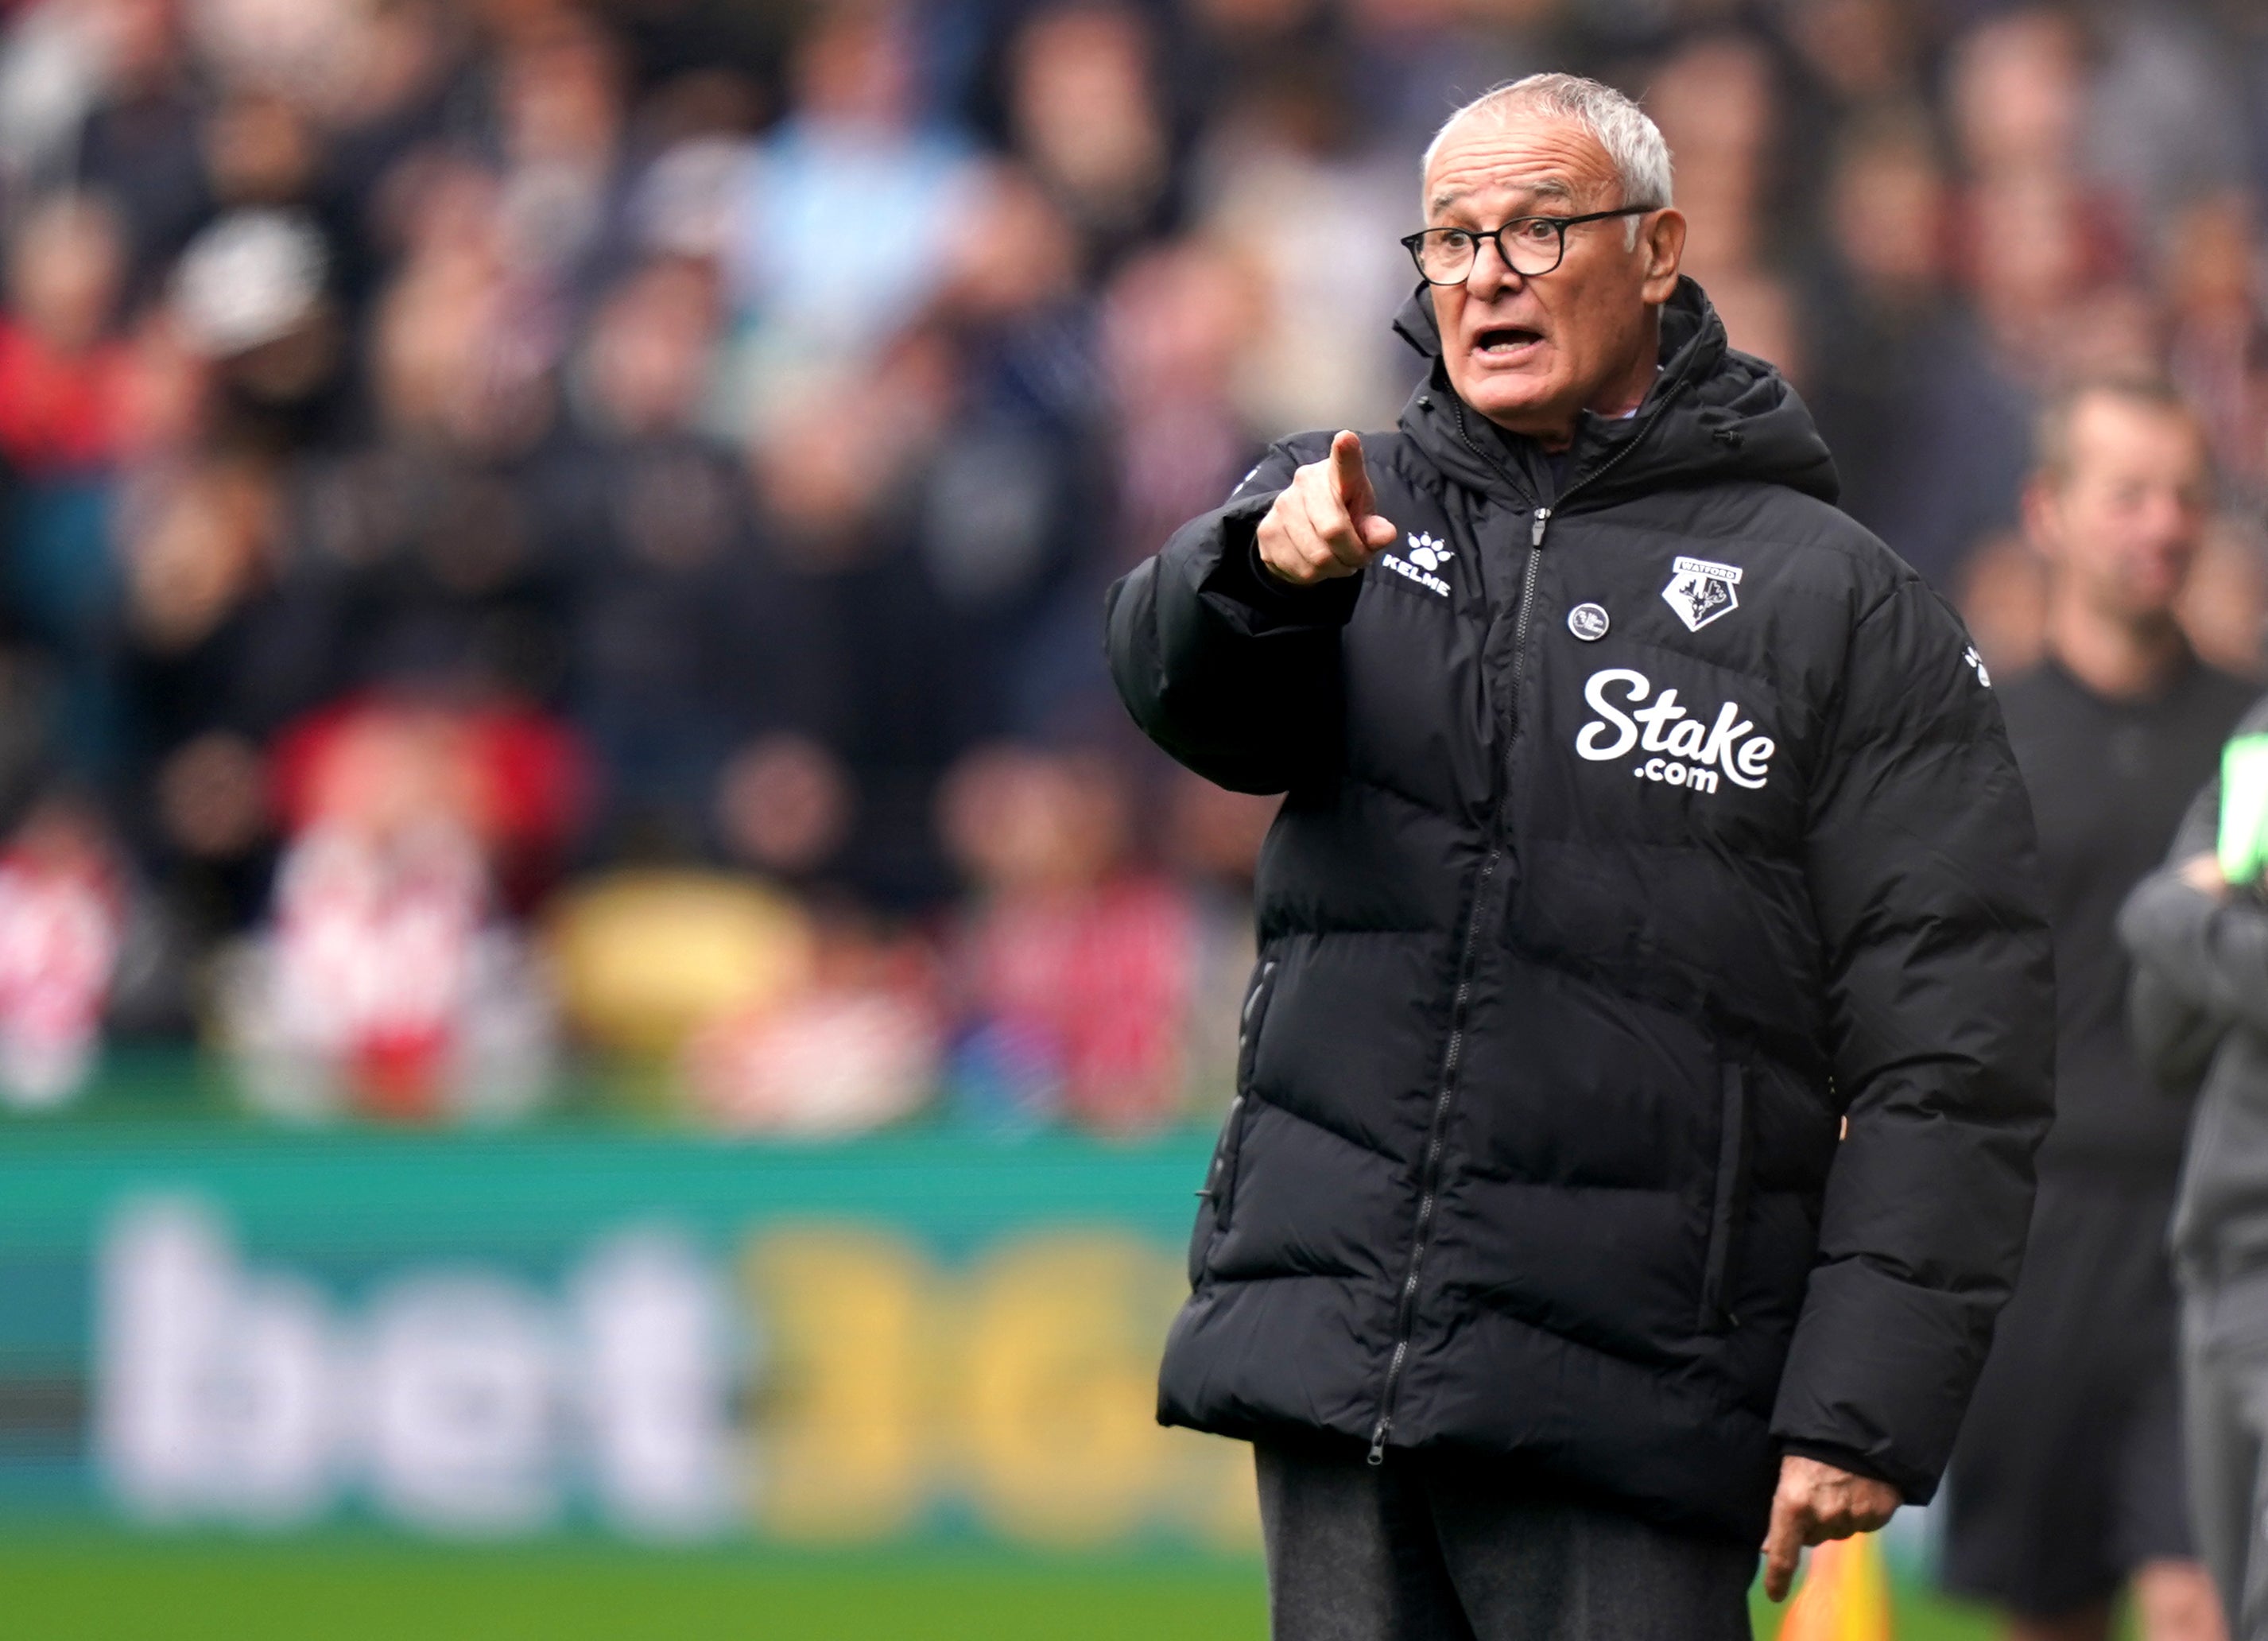 Claudio Ranieri urged his players to believe with ‘passion and heart’ after Watford slipped into the Premier League bottom three (Tess Derry/PA)